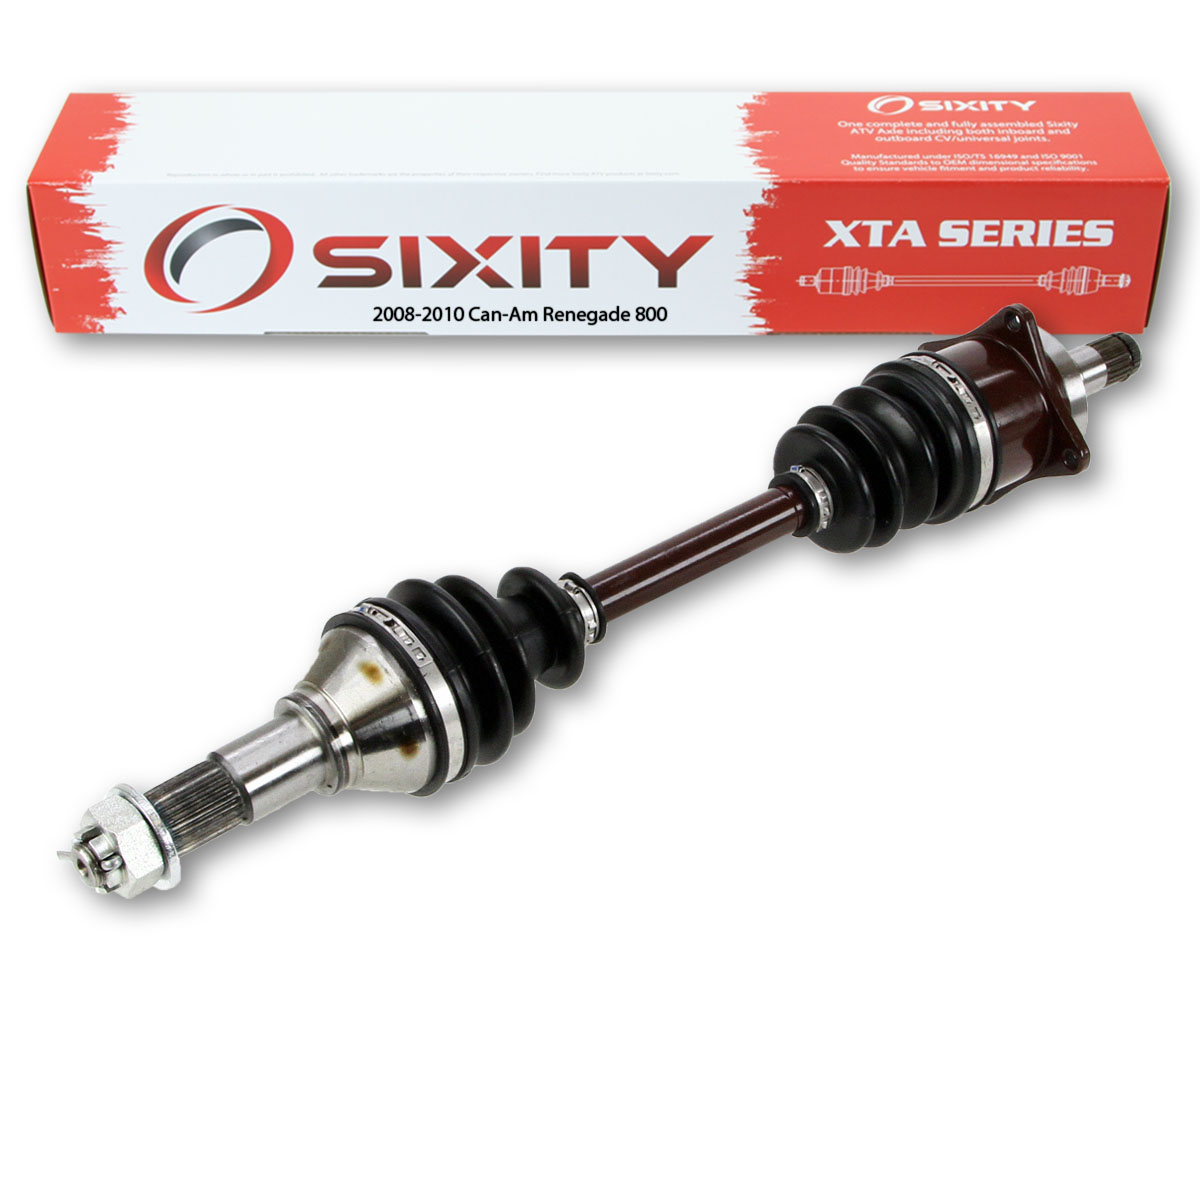 Sixity 2010 Can-Am Renegade 800 4X4 Front Left XTA ATV Axle